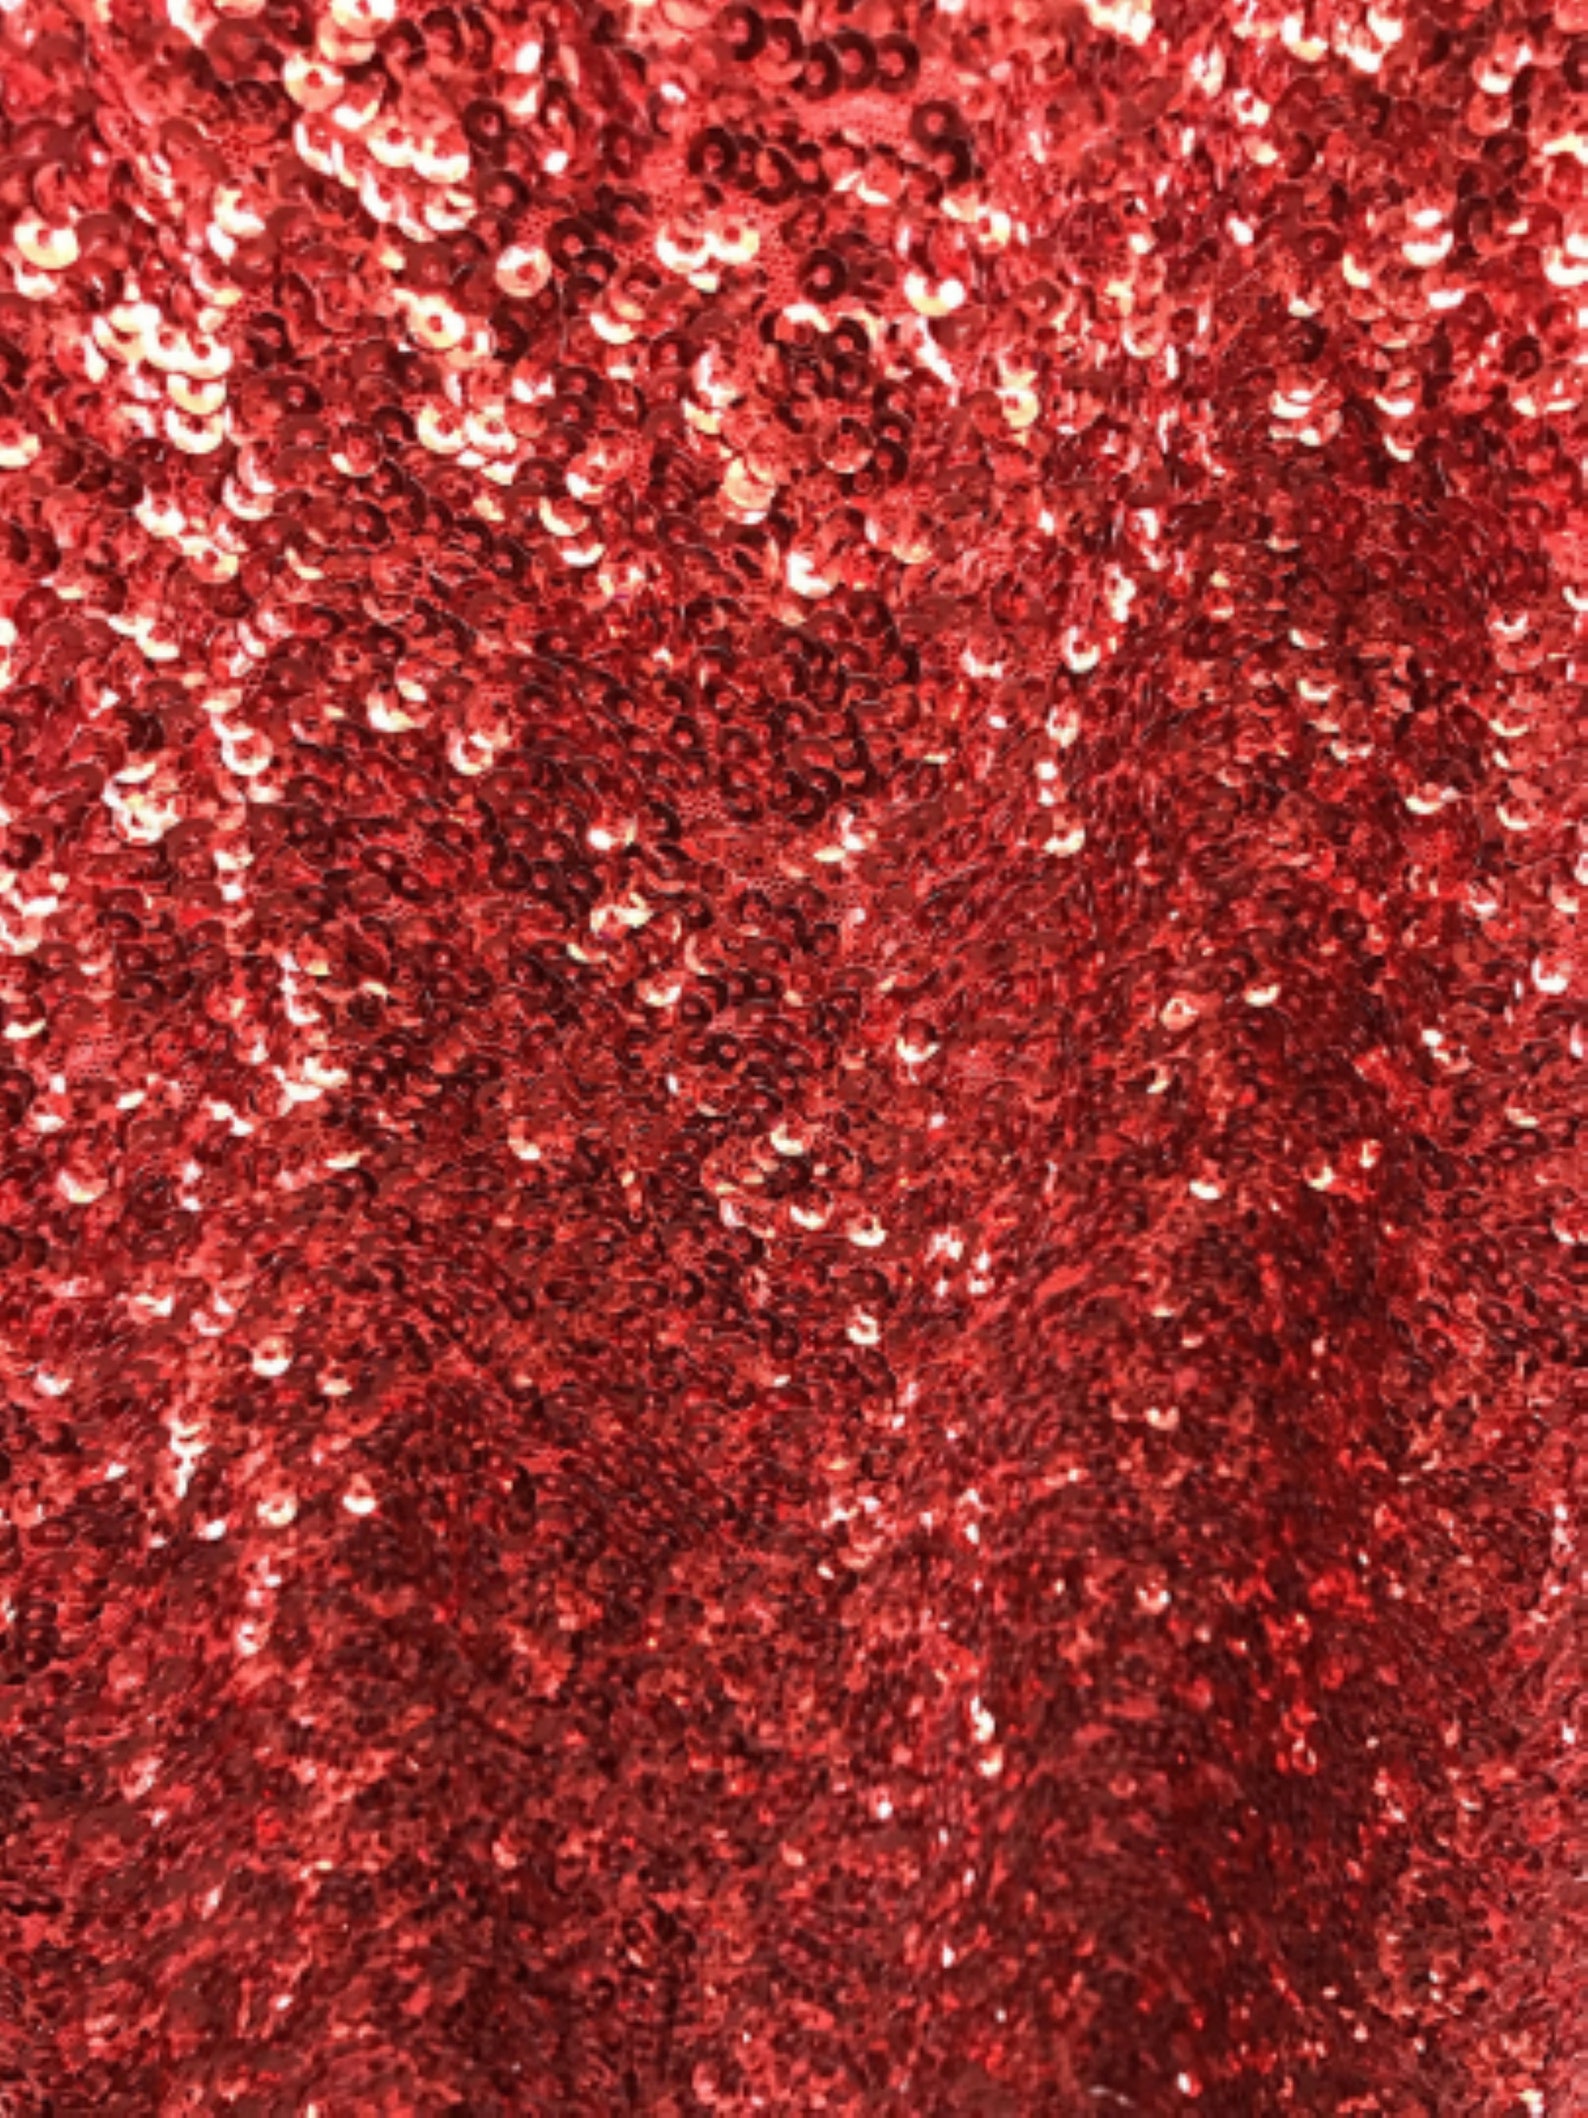 Red 3D Crushed Sequin Fabric By The Yard 60 Wide | Etsy